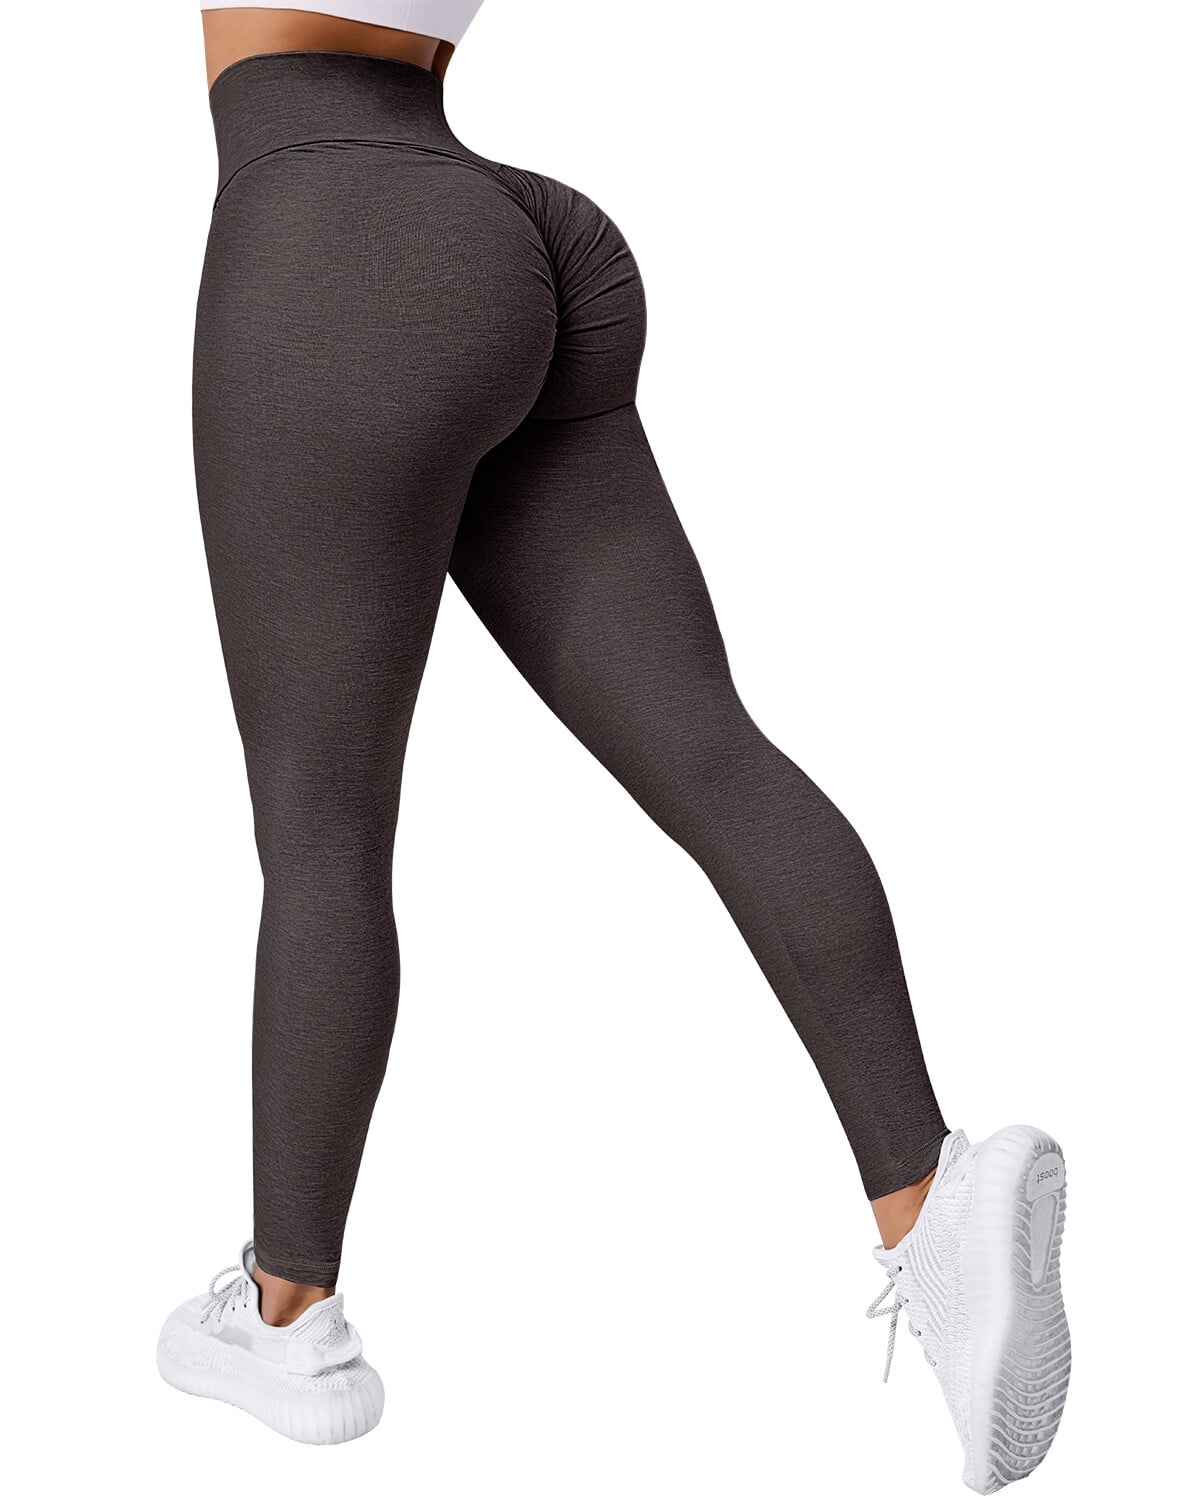 Quick Dry Fitness Prisma Leggings Online And Pants Set For Women Ideal For  Yoga, Running, And Gym Workouts S3 T200115 From Xue04, $13.62